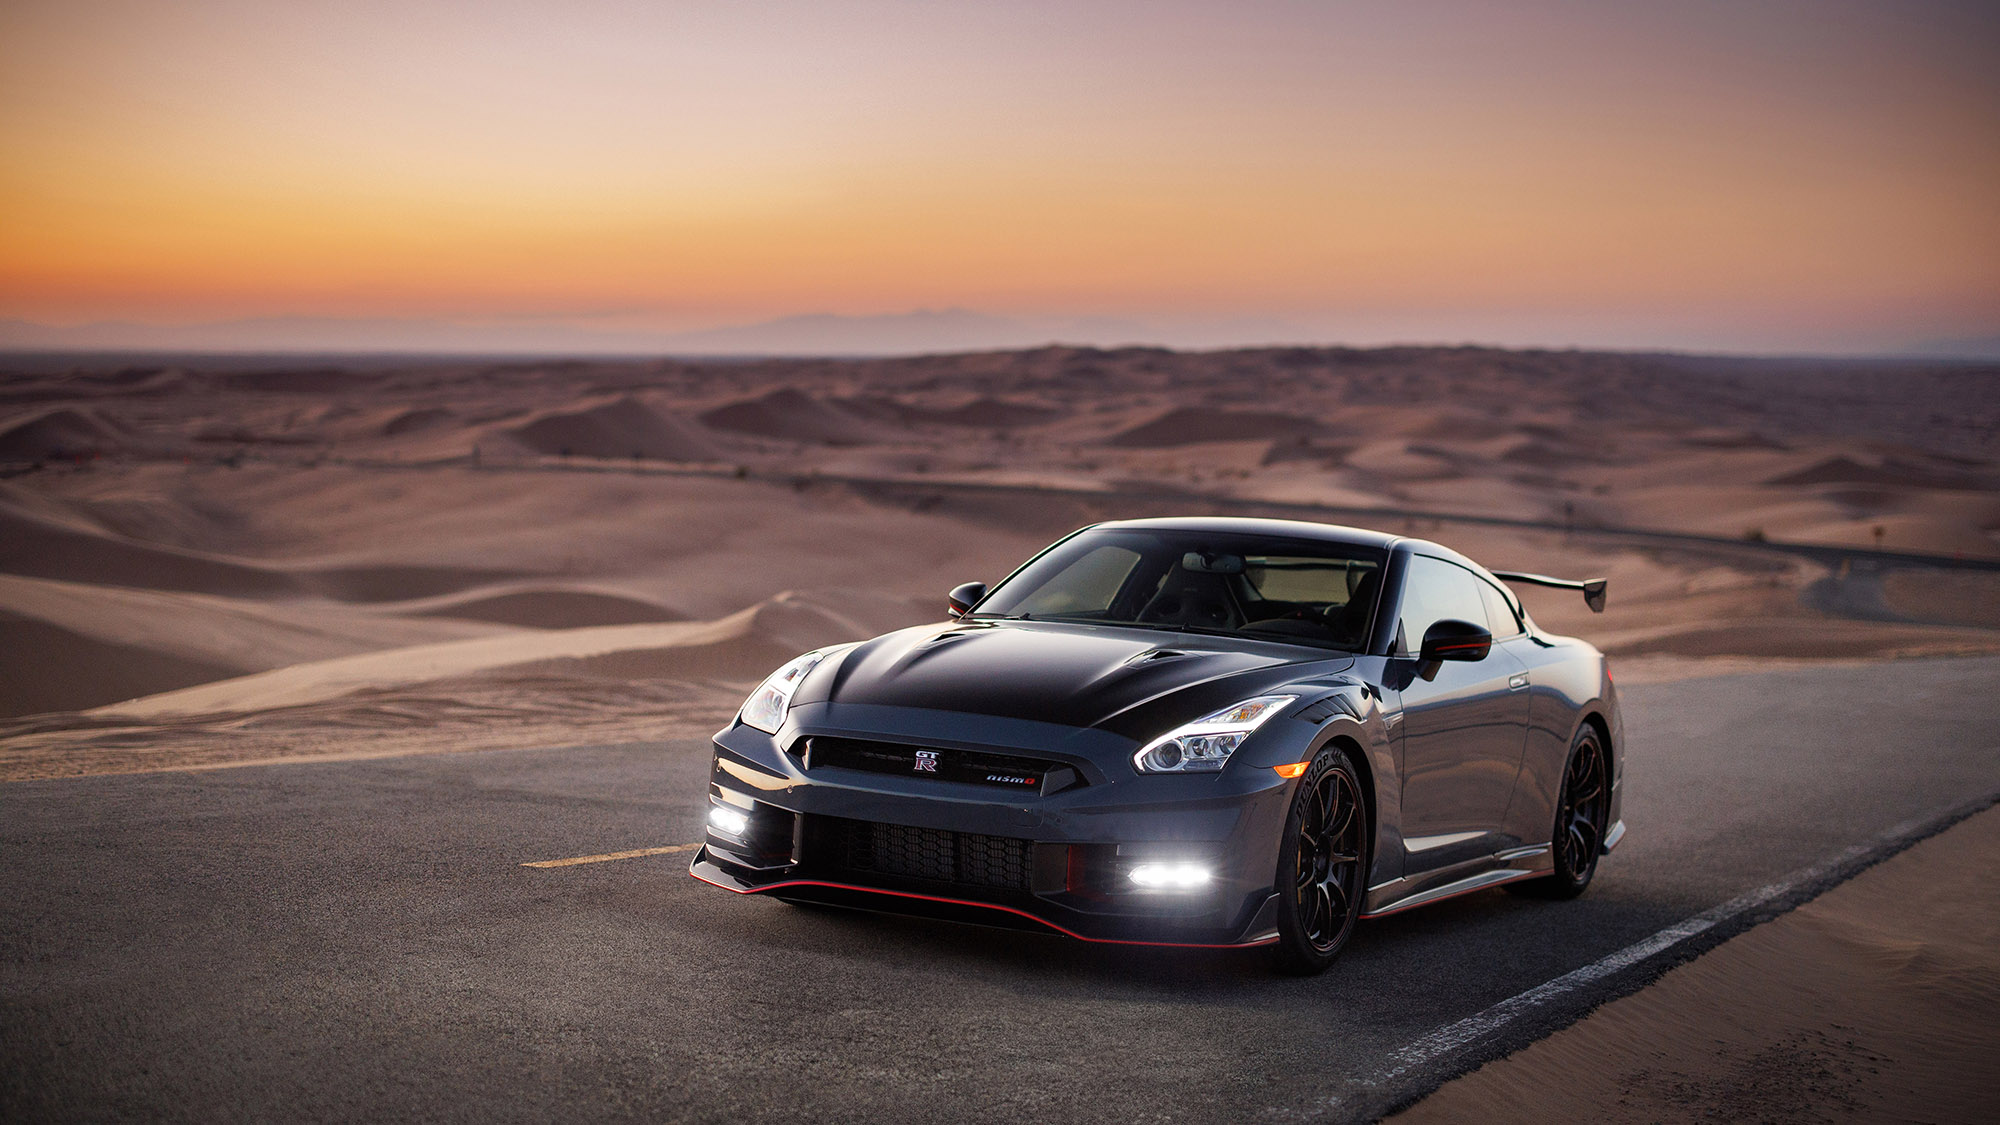 Affectionately known as "Godzilla," Nissan's GT-R sports car comes standard with LEDs.